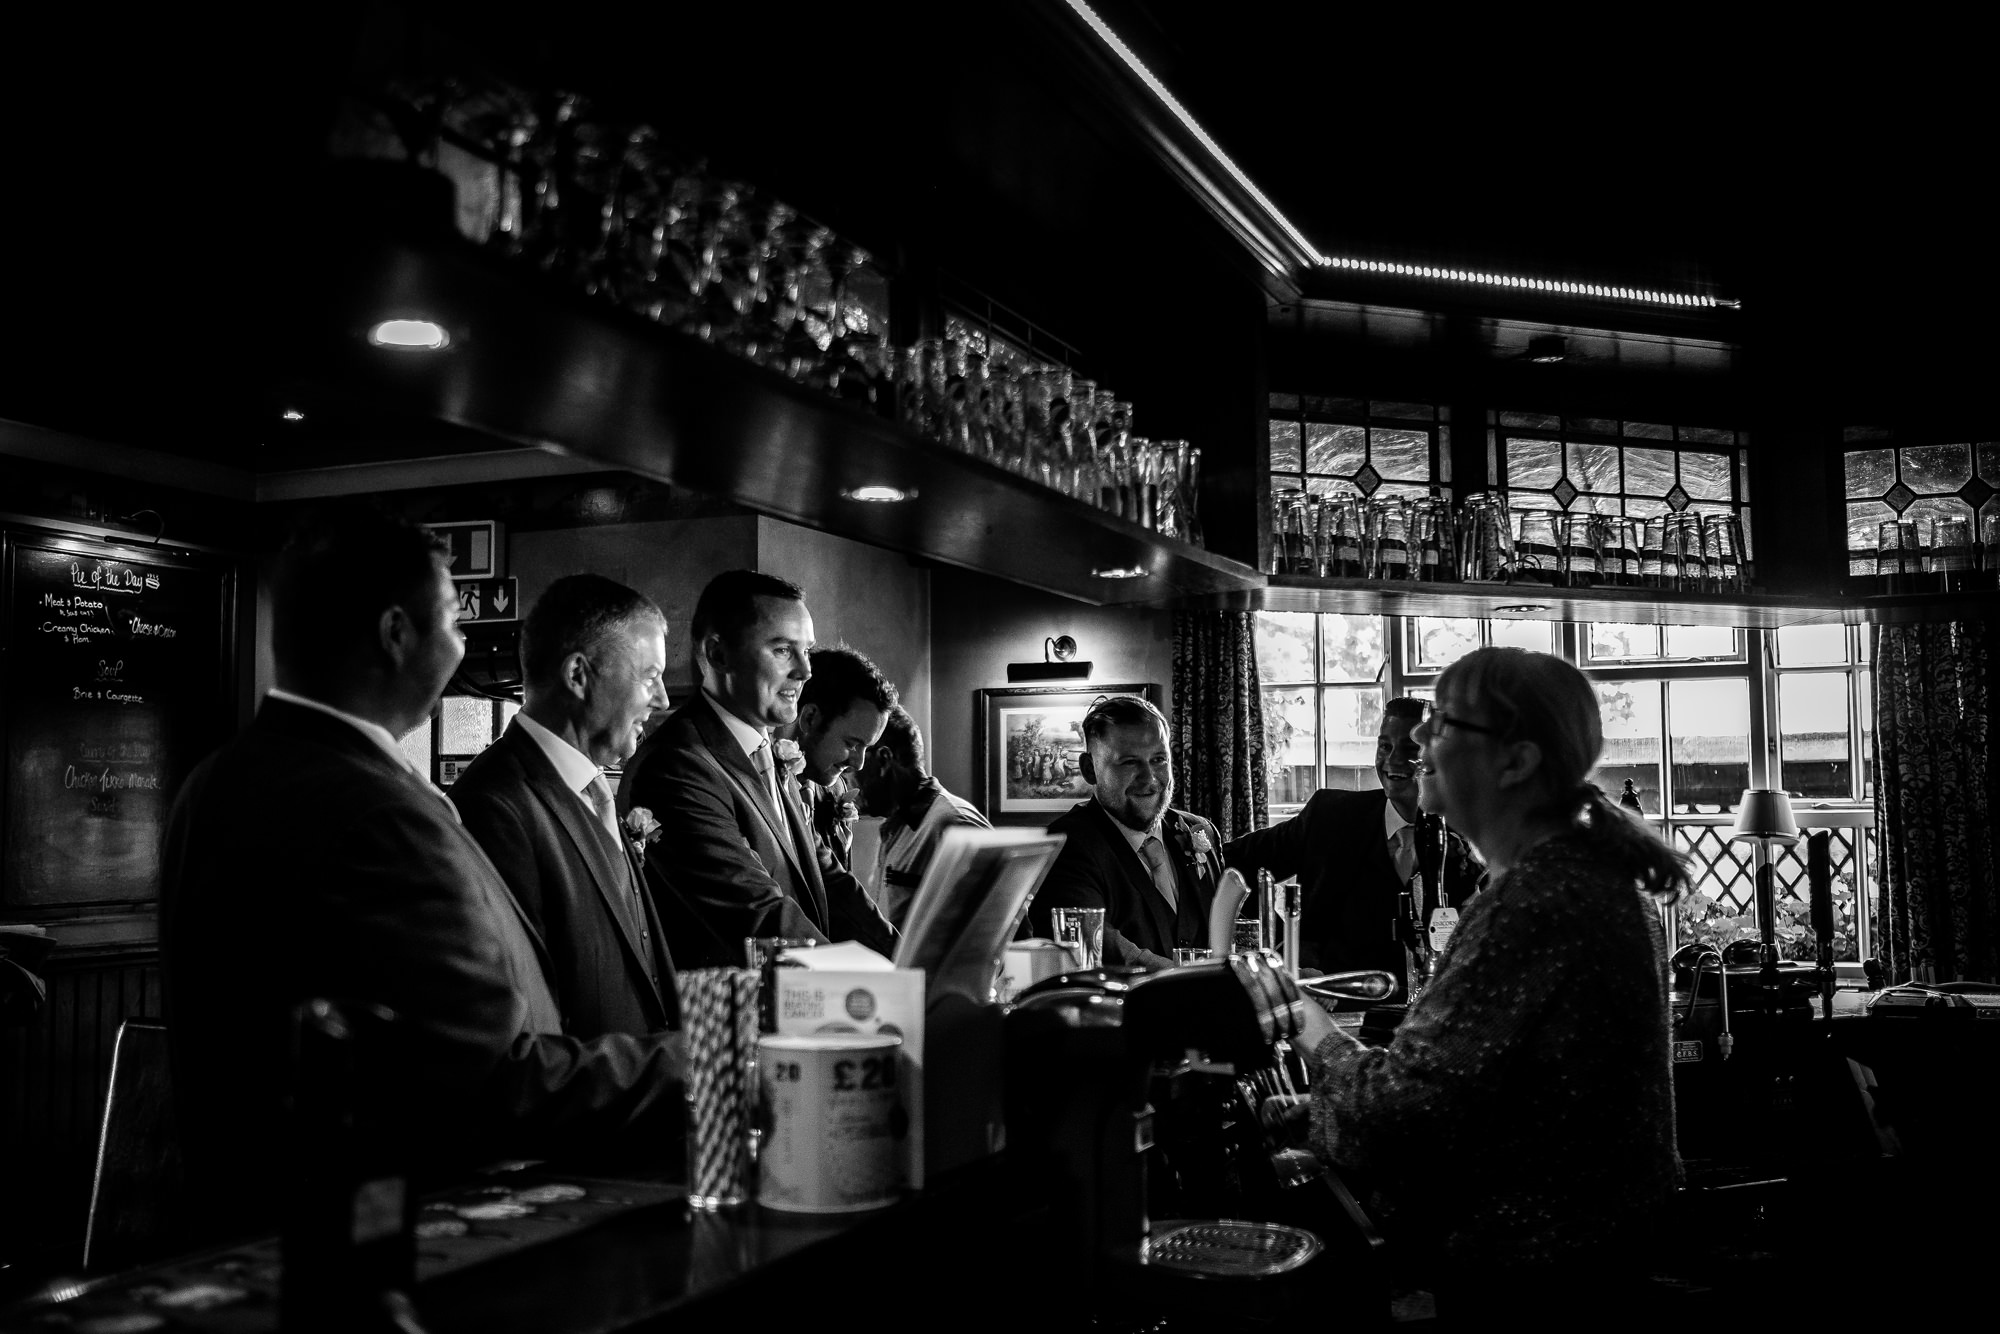 groom at the bar with friends